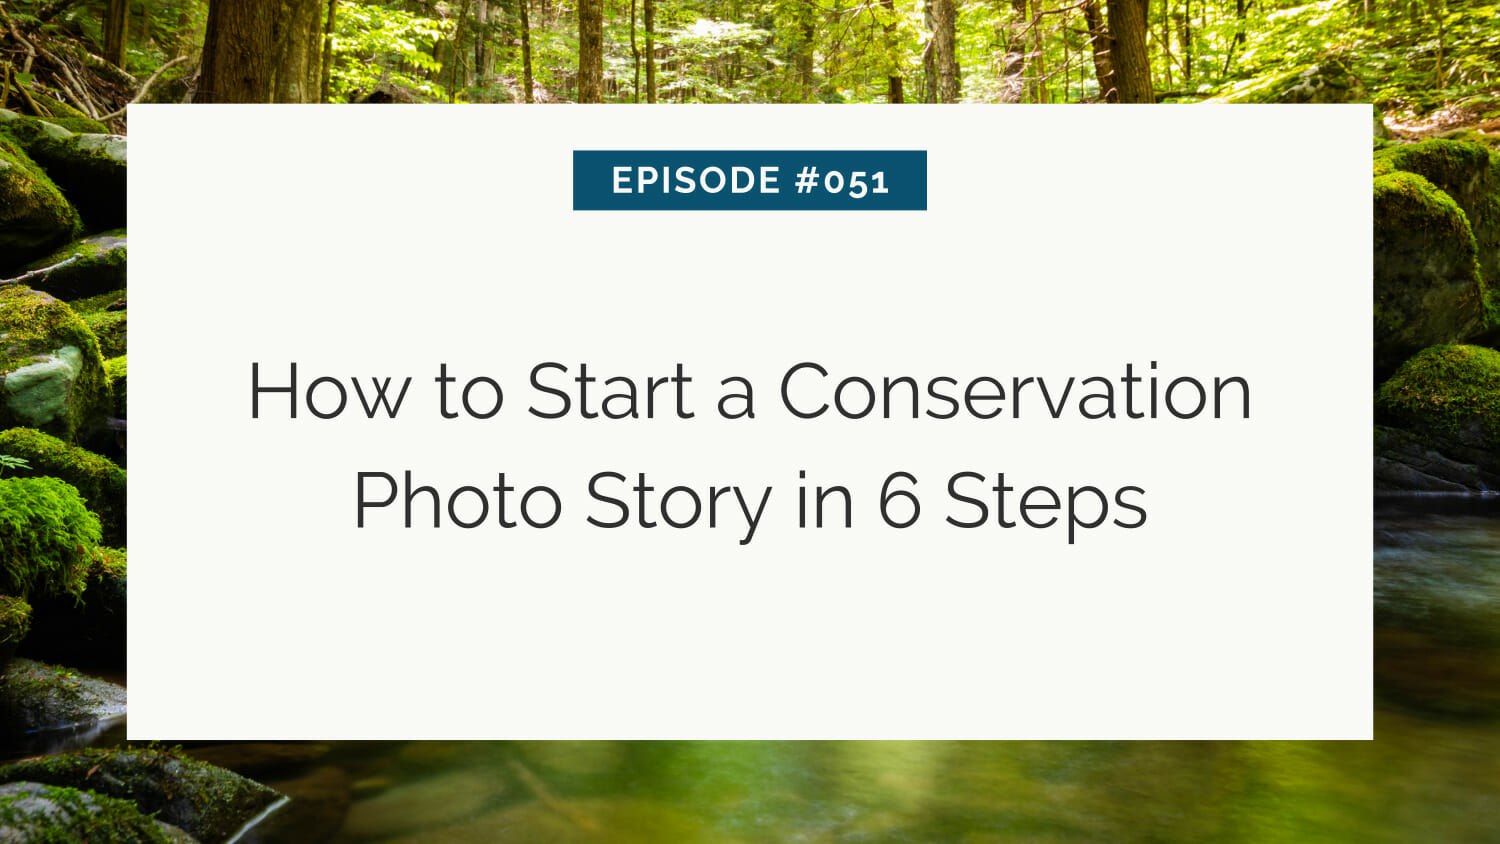 A slide titled "episode #051: how to start a conservation photo story in 6 steps" with a background image of a forest.